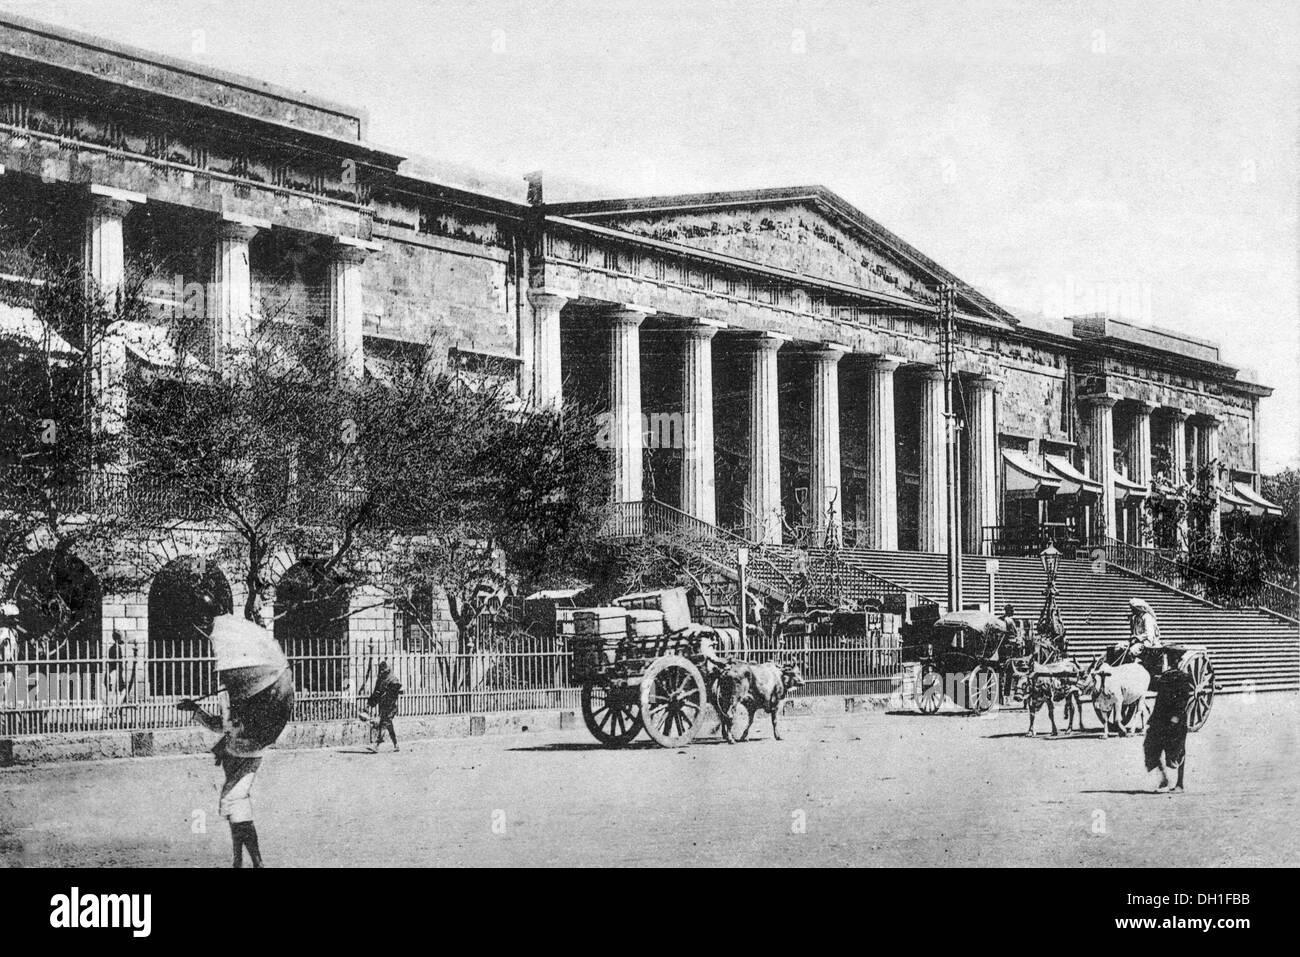 Asiatic Library Town Hall Horniman Circle Elphinstone Circle Fort Bombay Mumbai Maharashtra India Asia Old vintage 1900s picture Asiatic Society Stock Photo